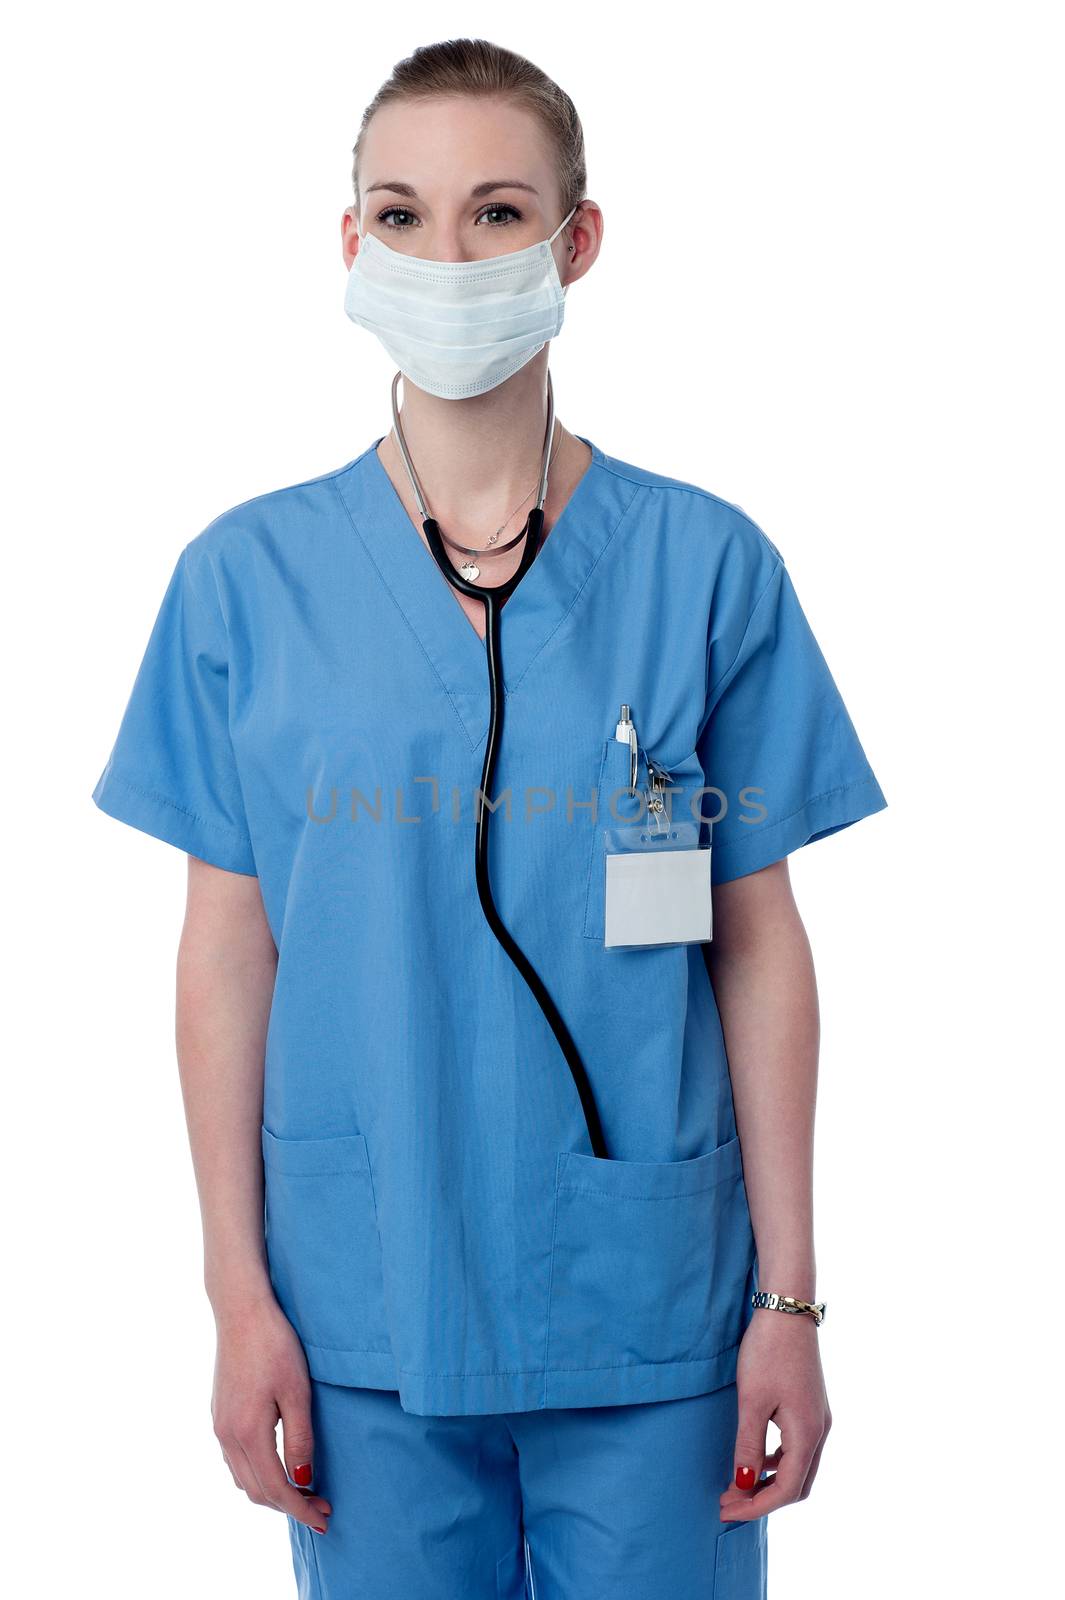 Female surgeon posing with face mask